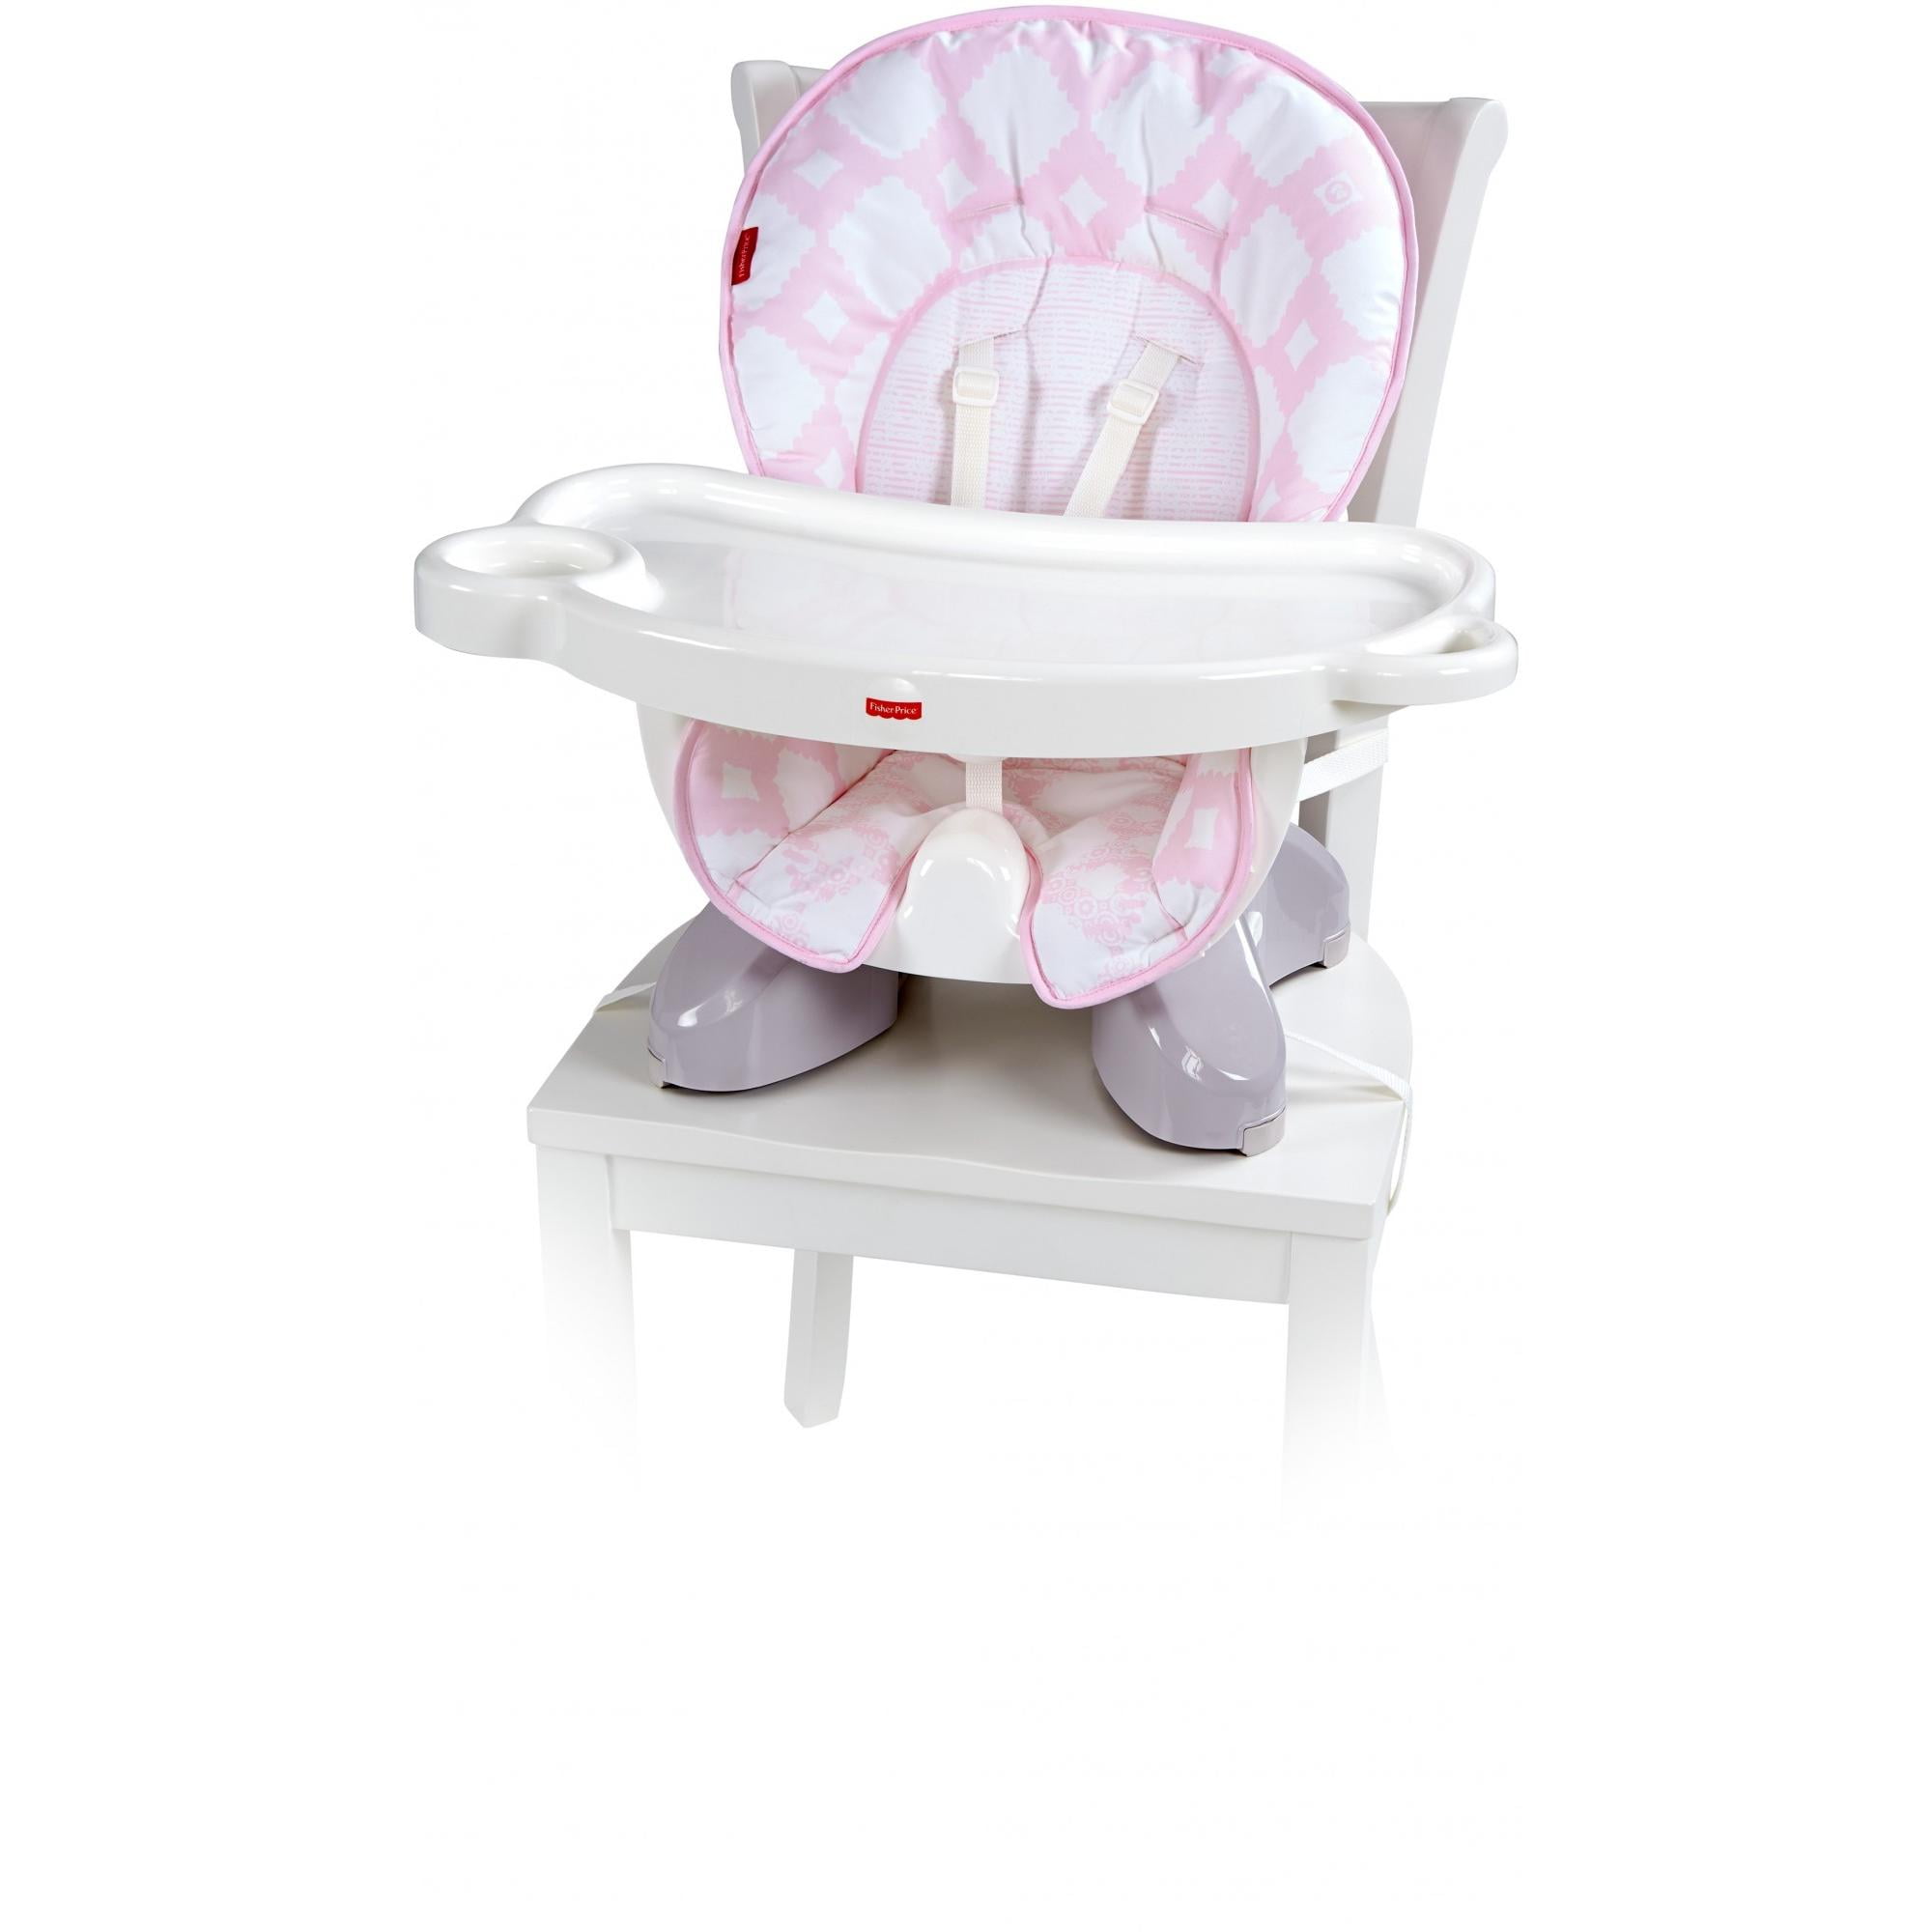 target fisher price space saver high chair